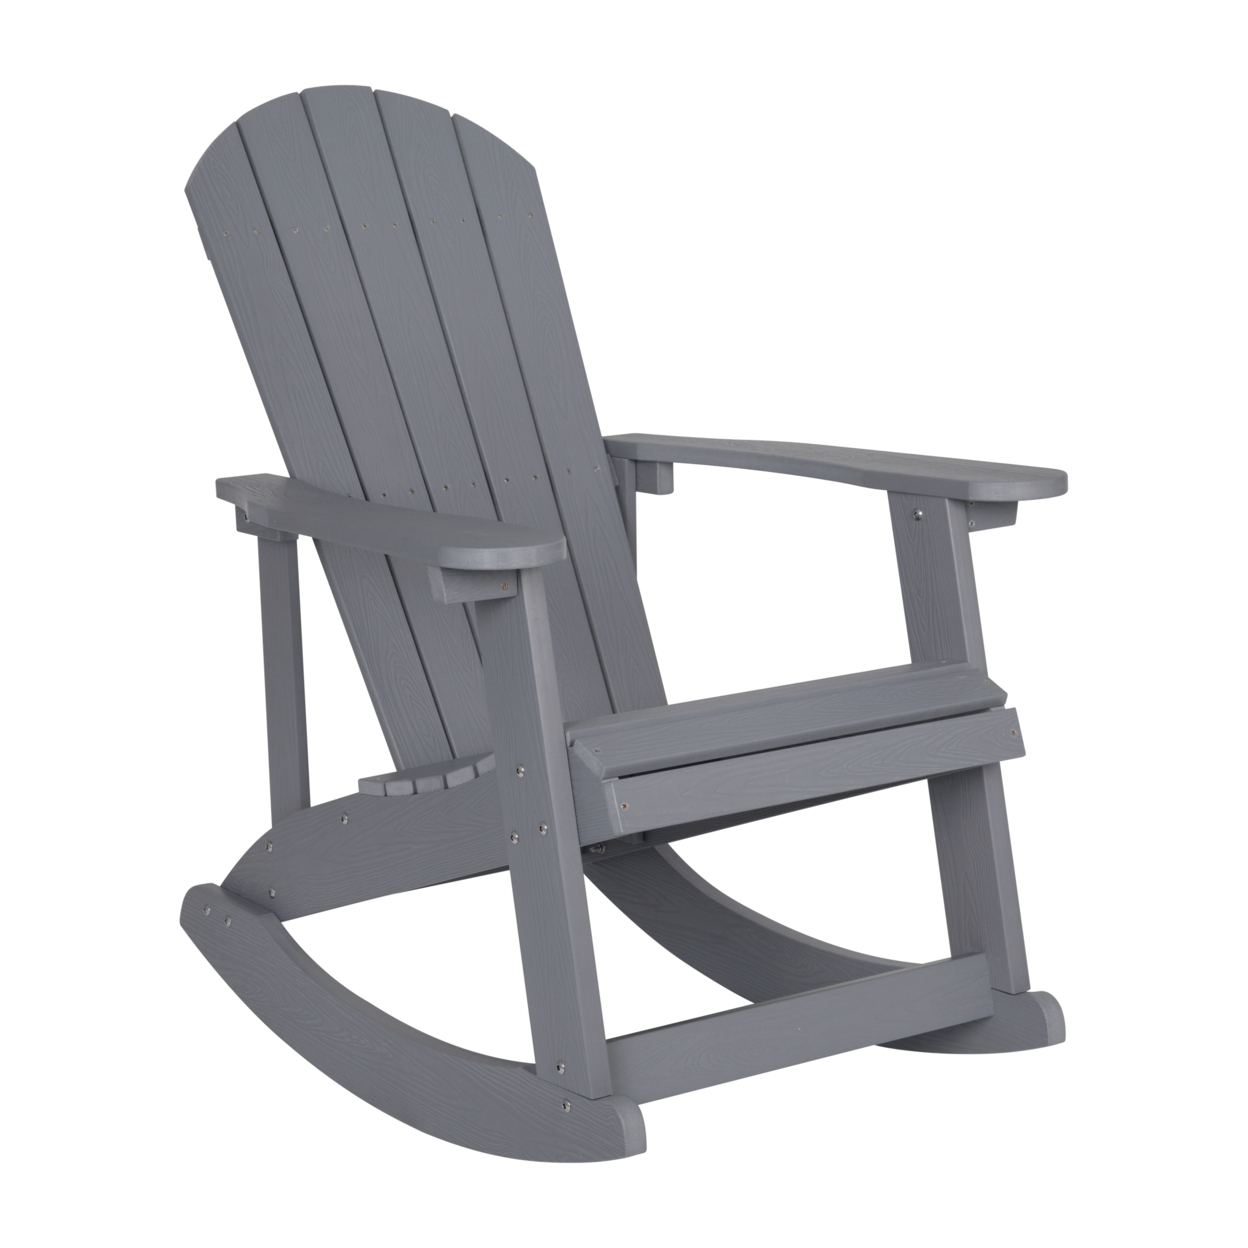 Savannah All-Weather Poly Resin Wood Adirondack Rocking Chair With Rust Resistant Stainless Steel Hardware In Gray